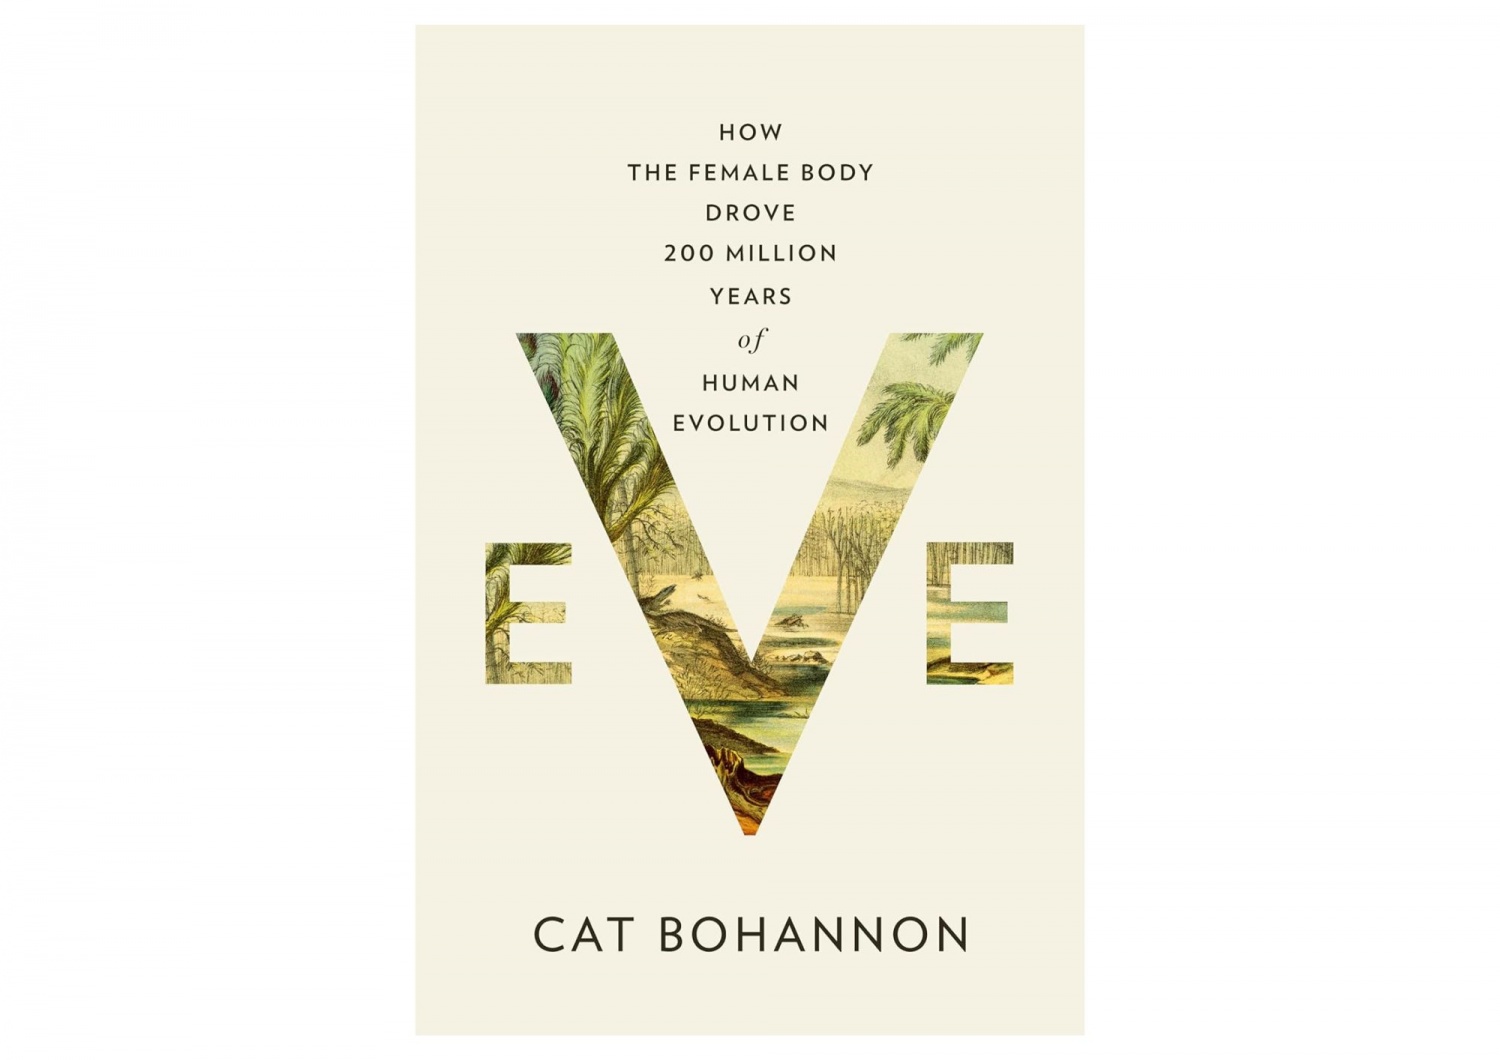 https://data.booksnreview.com/data/images/full/17769/author-cat-bohannon-challenges-myths-on-human-evolution-with-book-eve.jpg